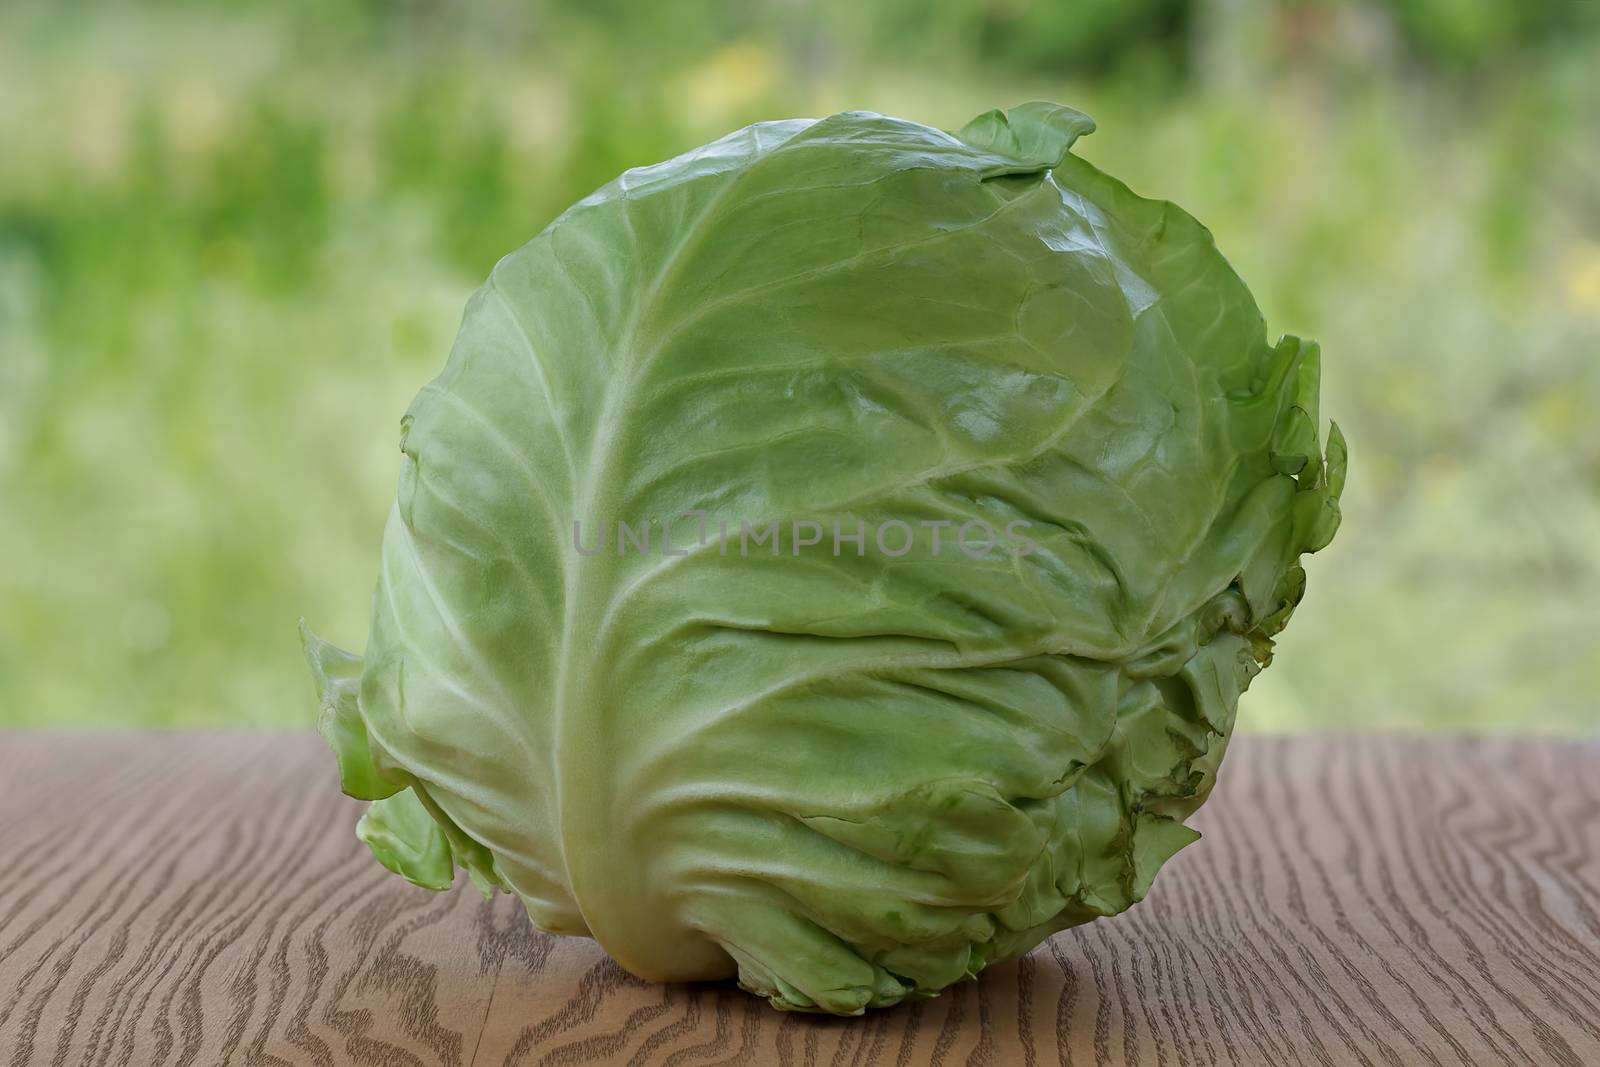 One juicy cabbage  by baronvsp